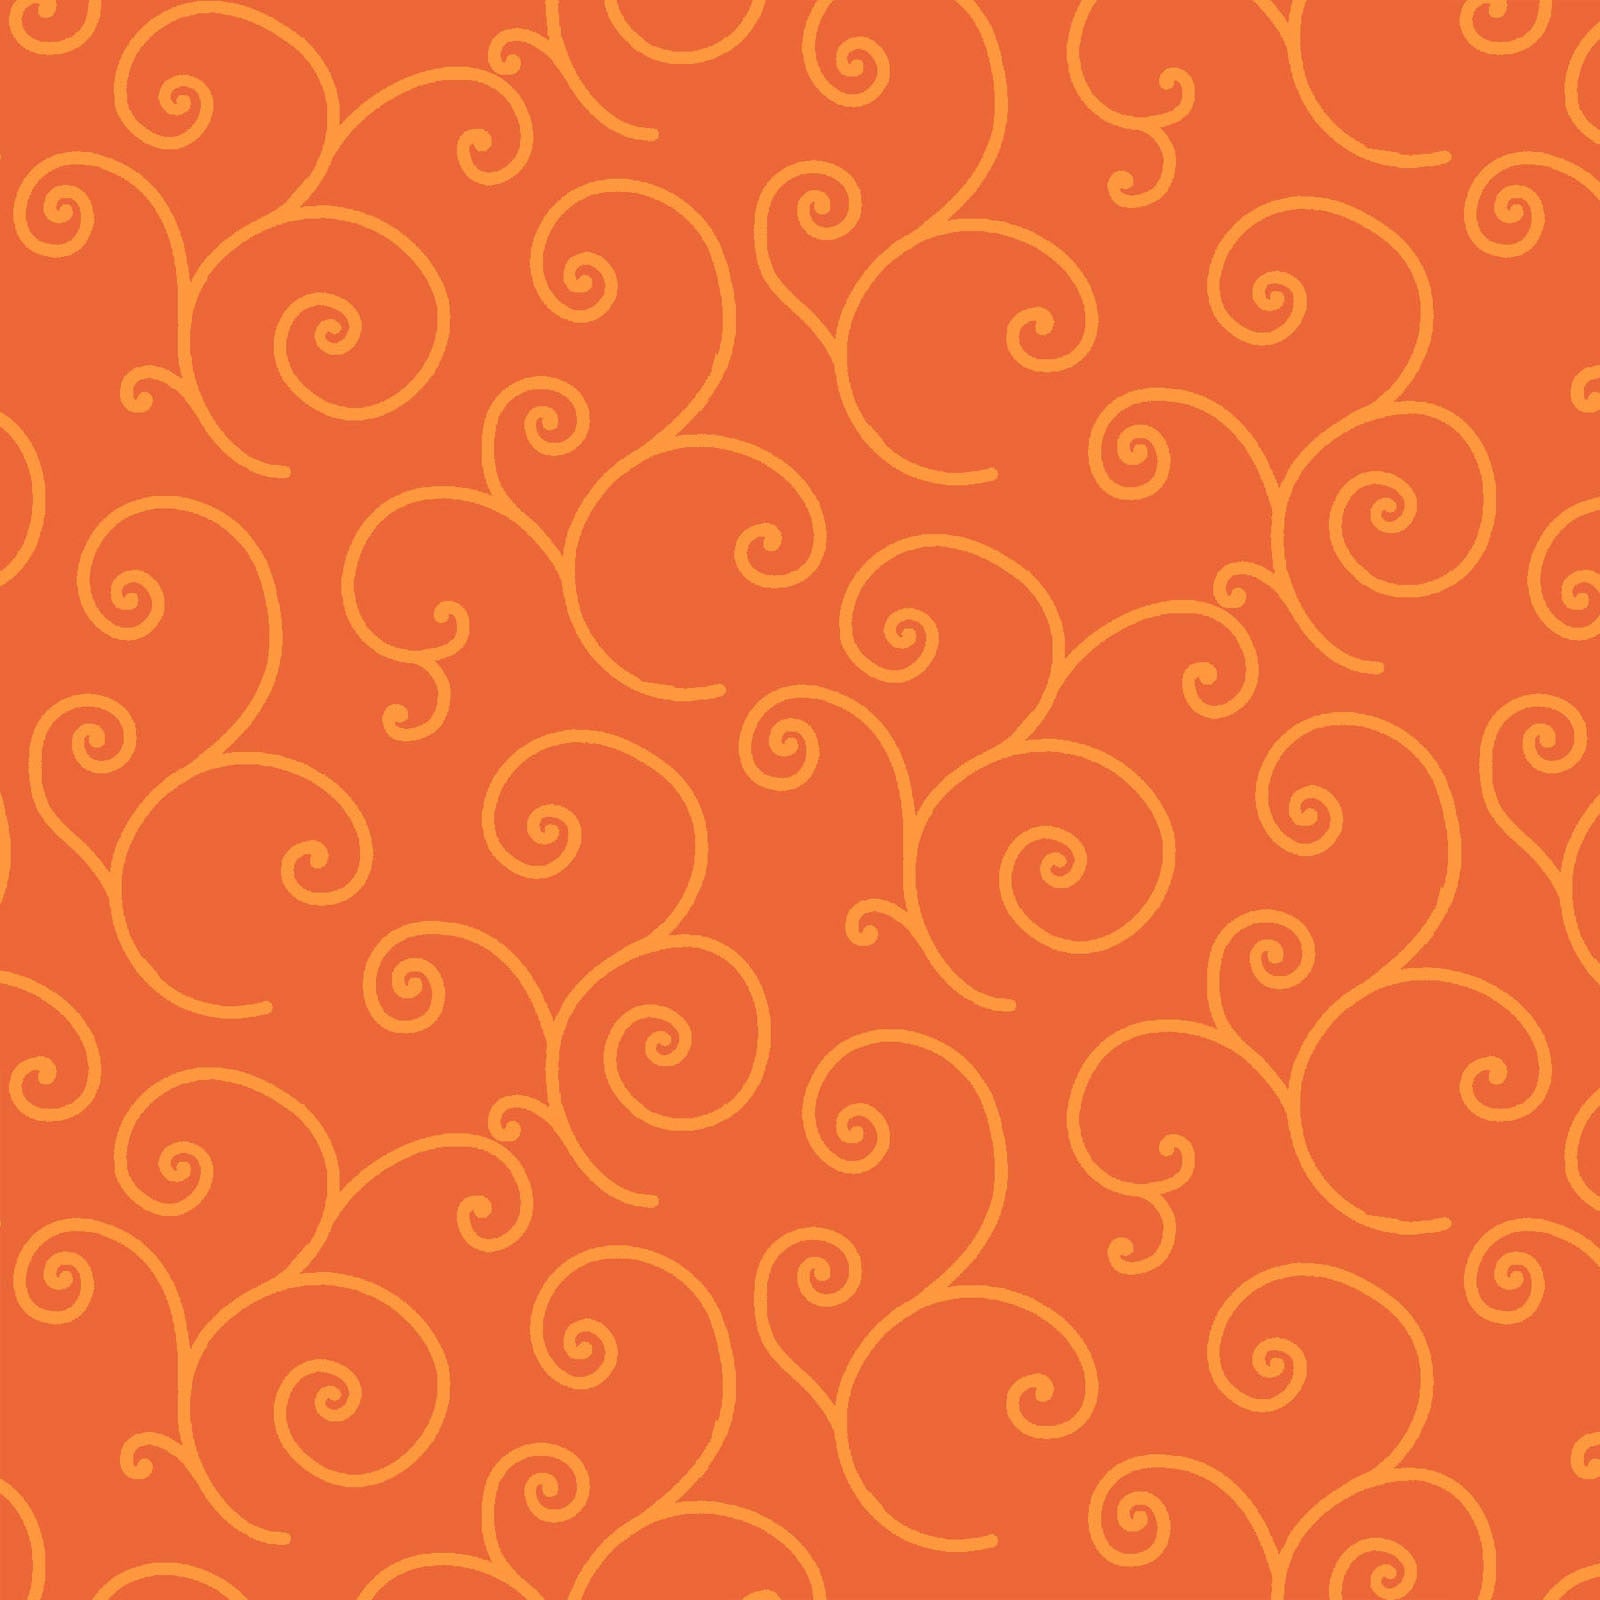 Scroll Orange on Orange (MAS8243-OO) is part of the Kimberbell Basics line designed by Kim Christopherson for Maywood Studio. This fabric features orange tone on tone scroll, adding a whimsical touch that isn't overpowering in projects.